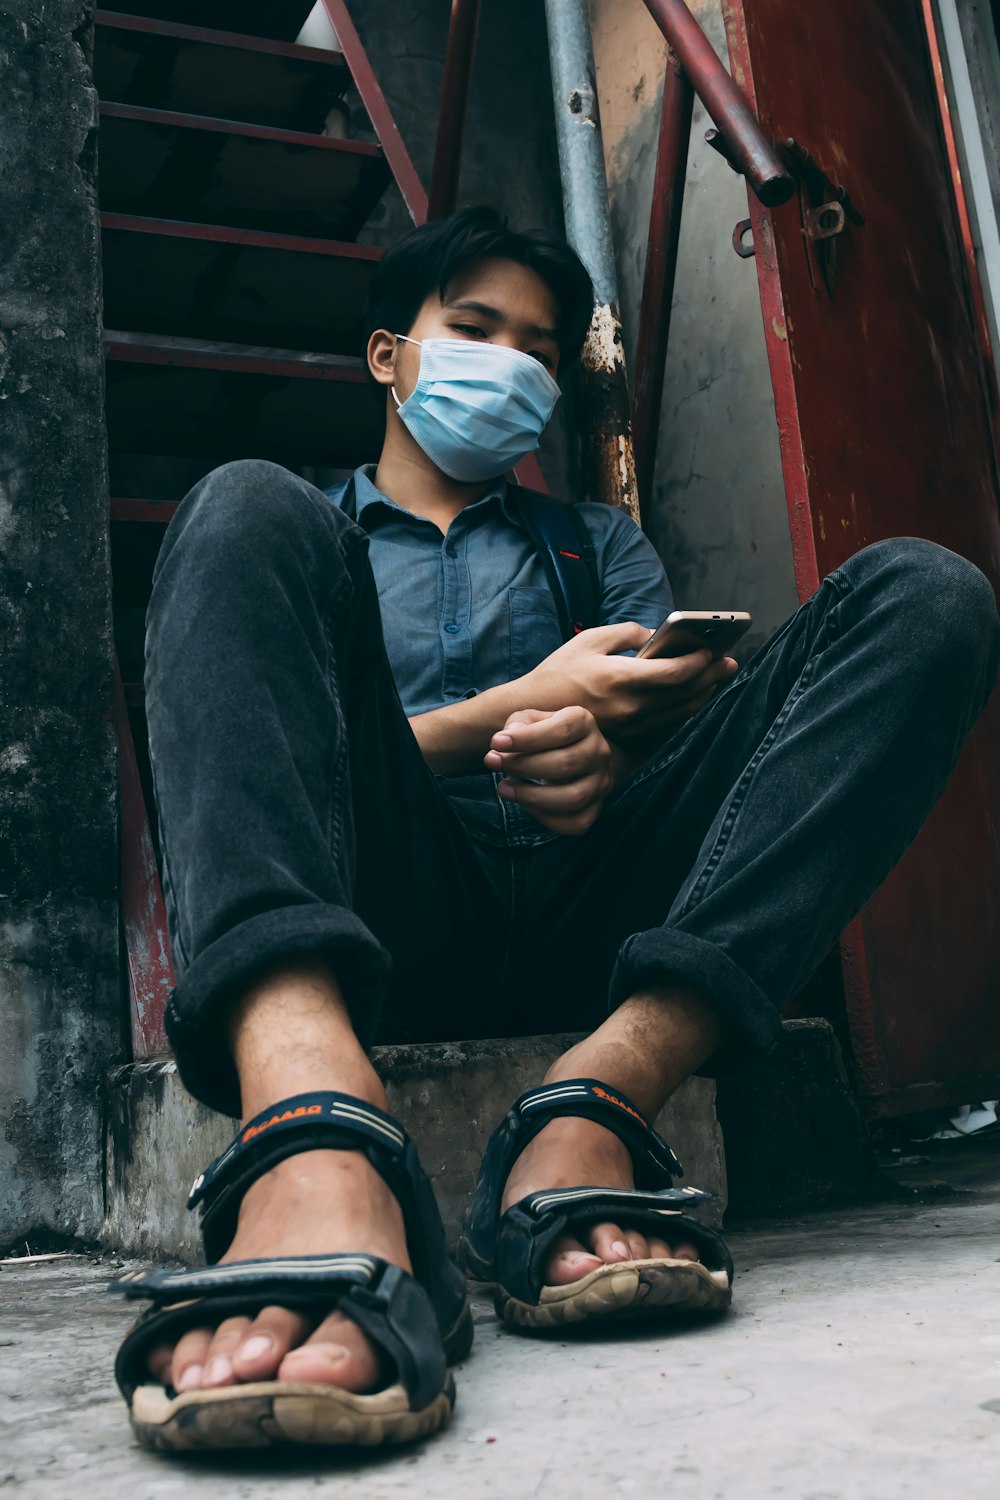 a man wearing a face mask while sitting on the ground